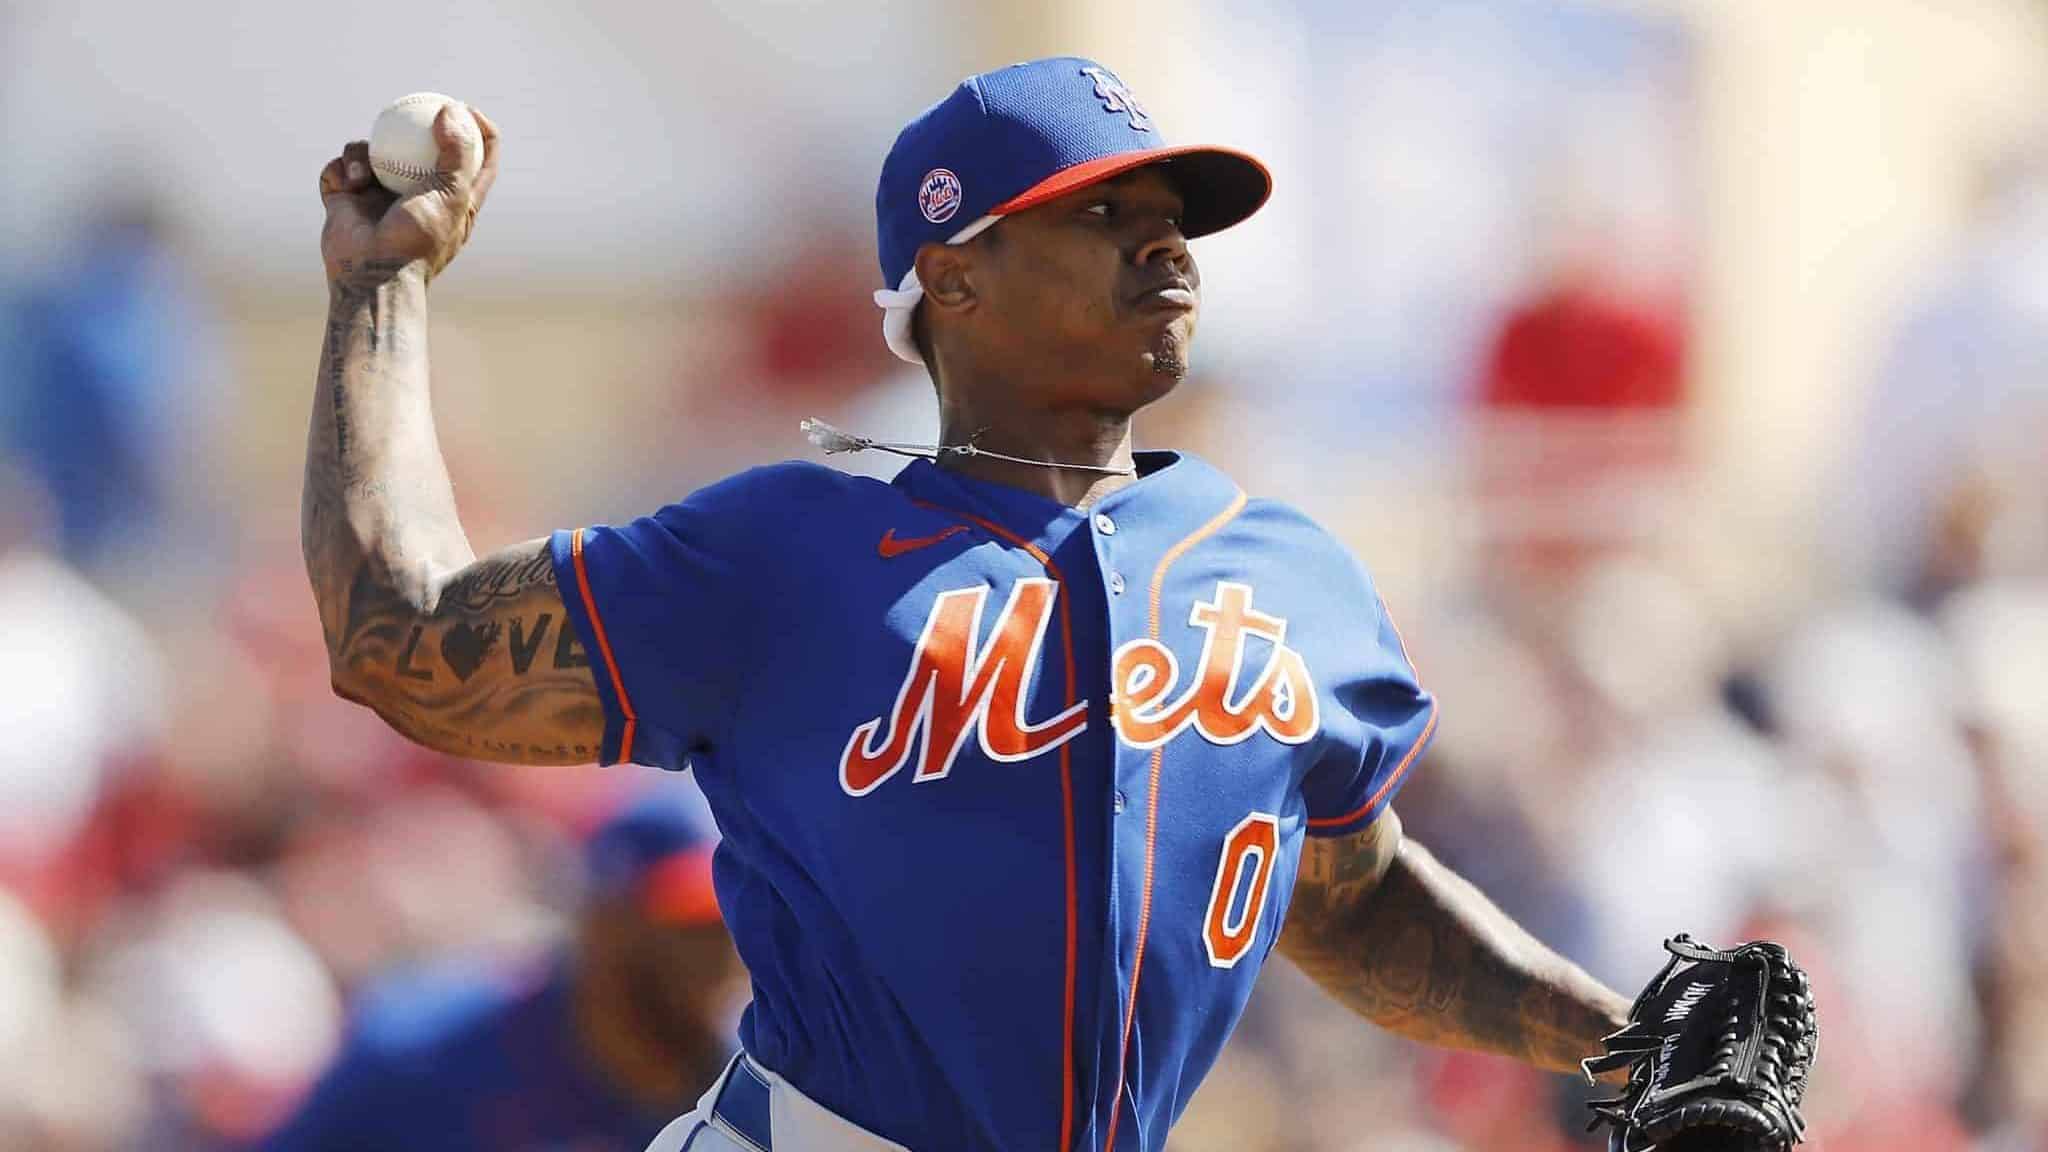 JUPITER, FLORIDA - FEBRUARY 22: Marcus Stroman #0 of the New York Mets delivers a pitch in the second inning of a Grapefruit League spring training game at Roger Dean Stadium on February 22, 2020 in Jupiter, Florida.